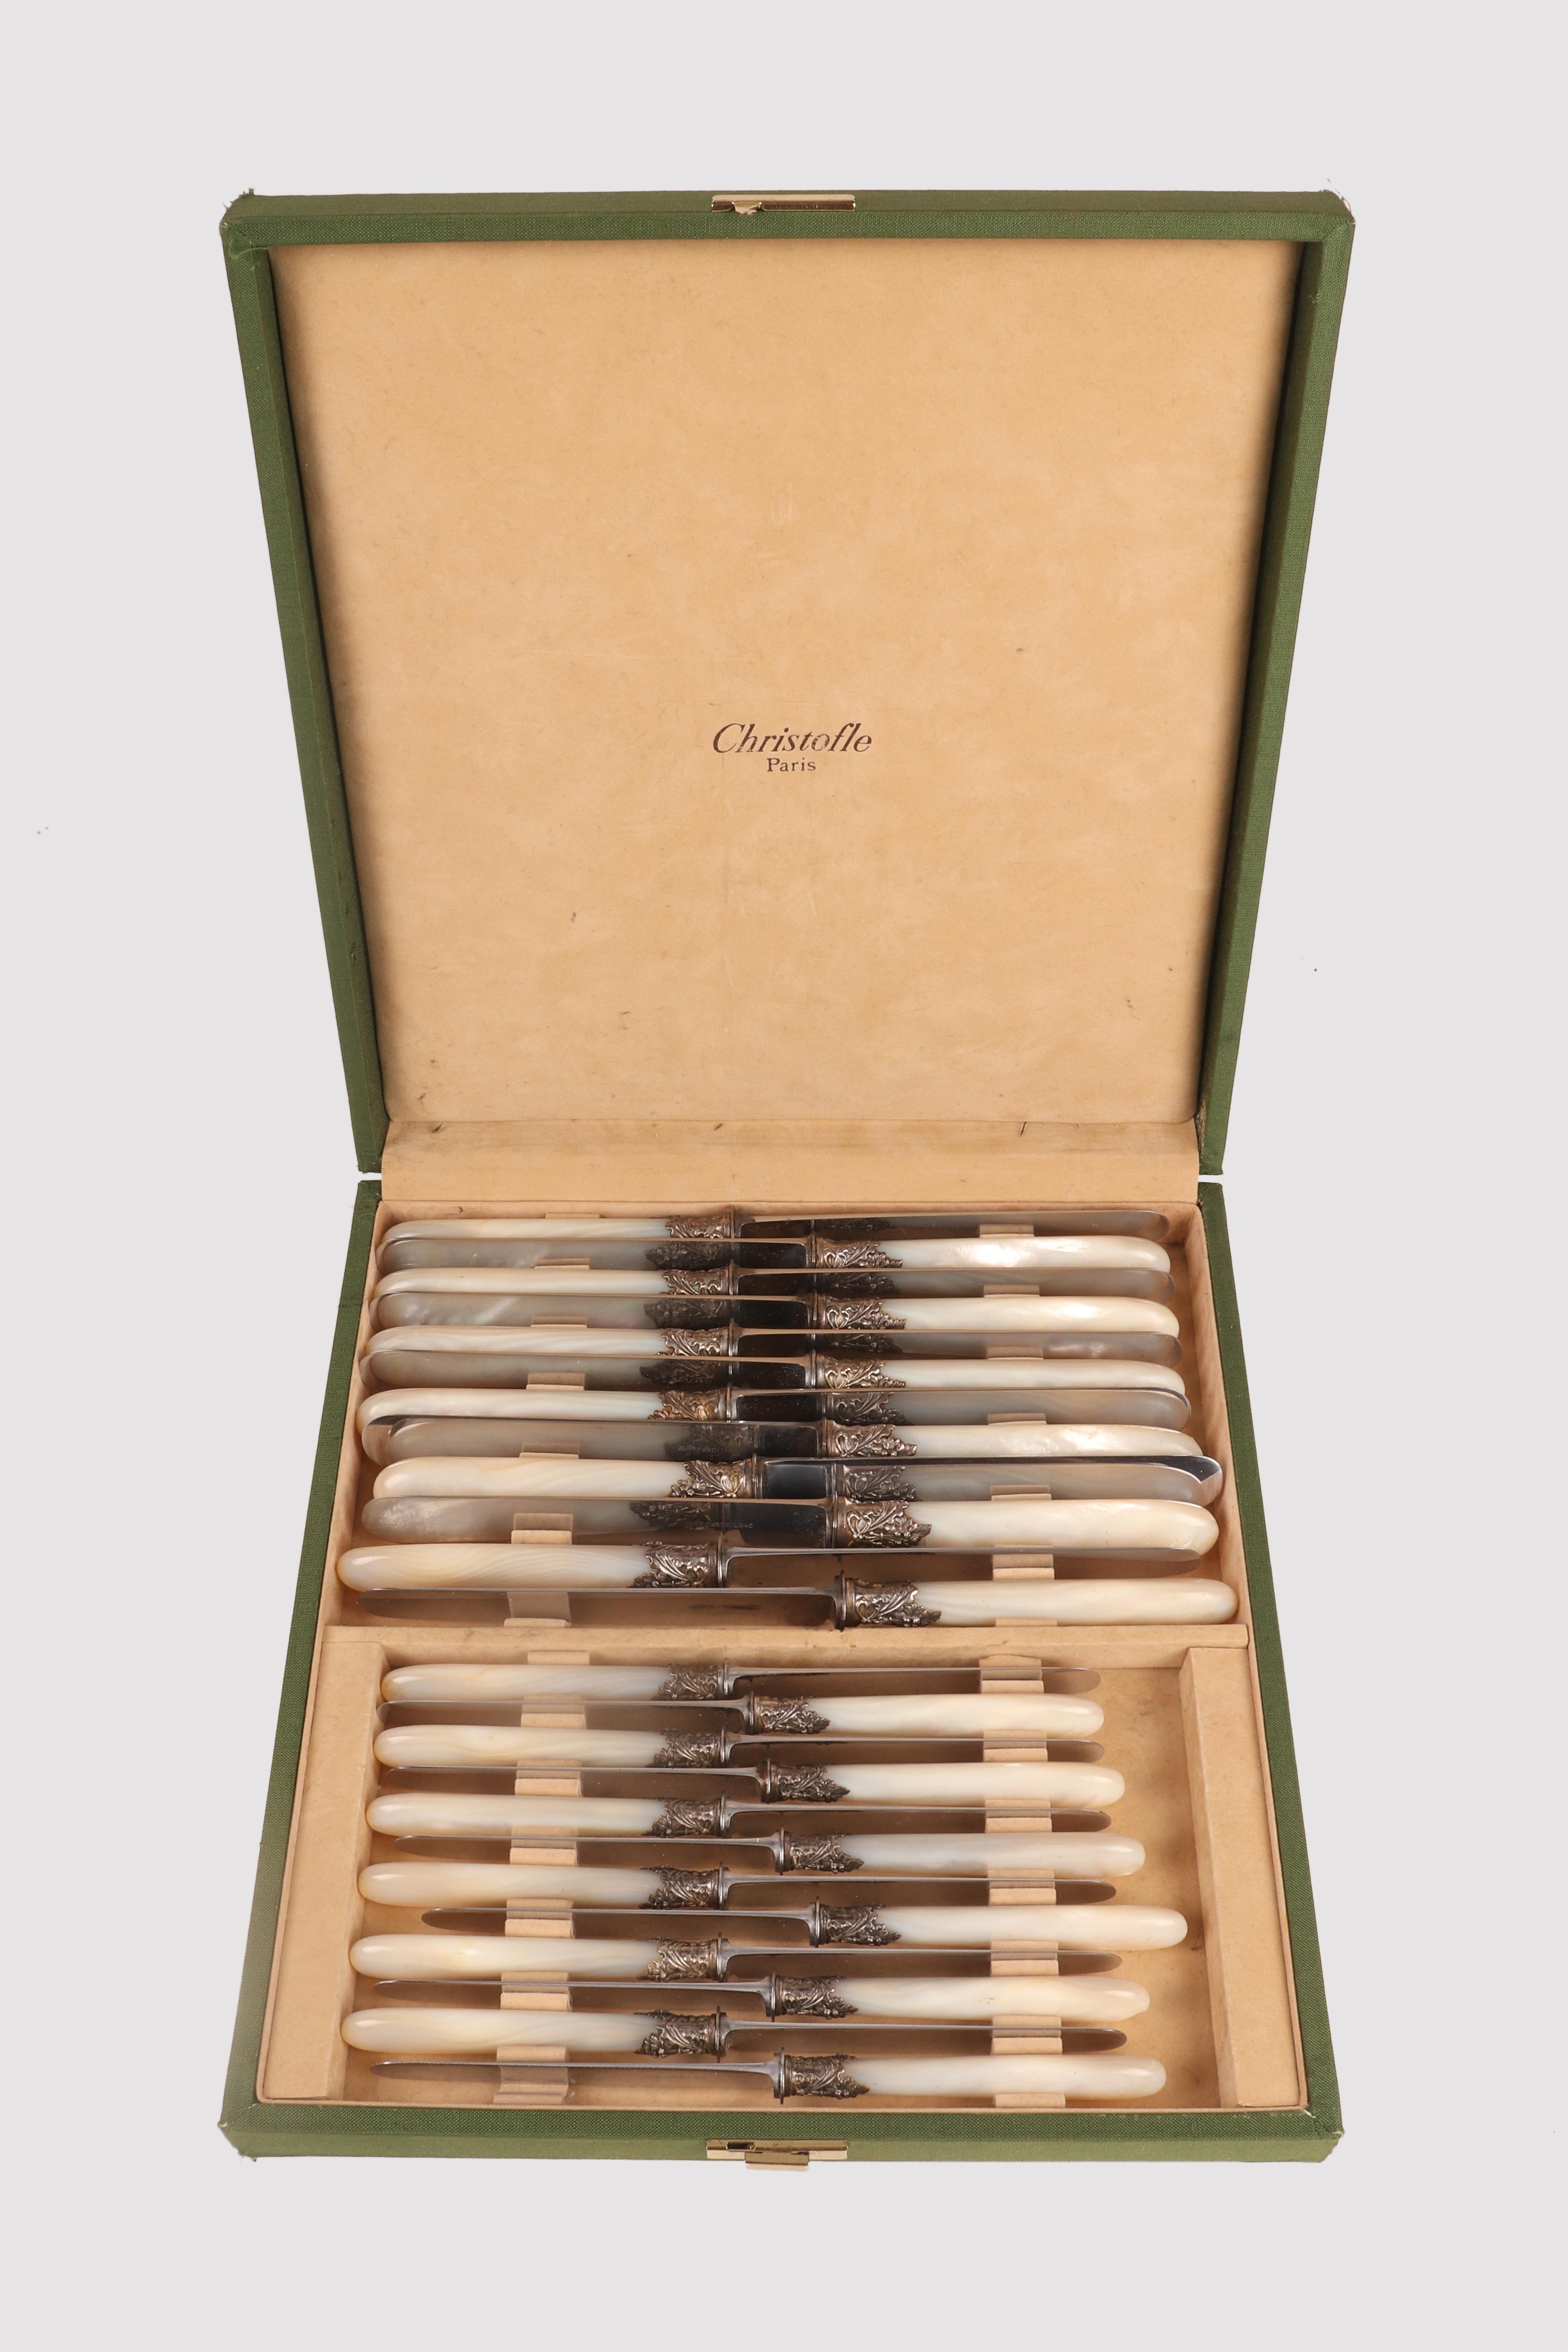 Set of knives, twelve cutting and twelve fruit knives, steel blades, marked by the silversmith Ernest Cardeilhac who joined the Maison Christofle in 1951. The handles are made of a single core of mother-of-pearl slightly expanded at the base and